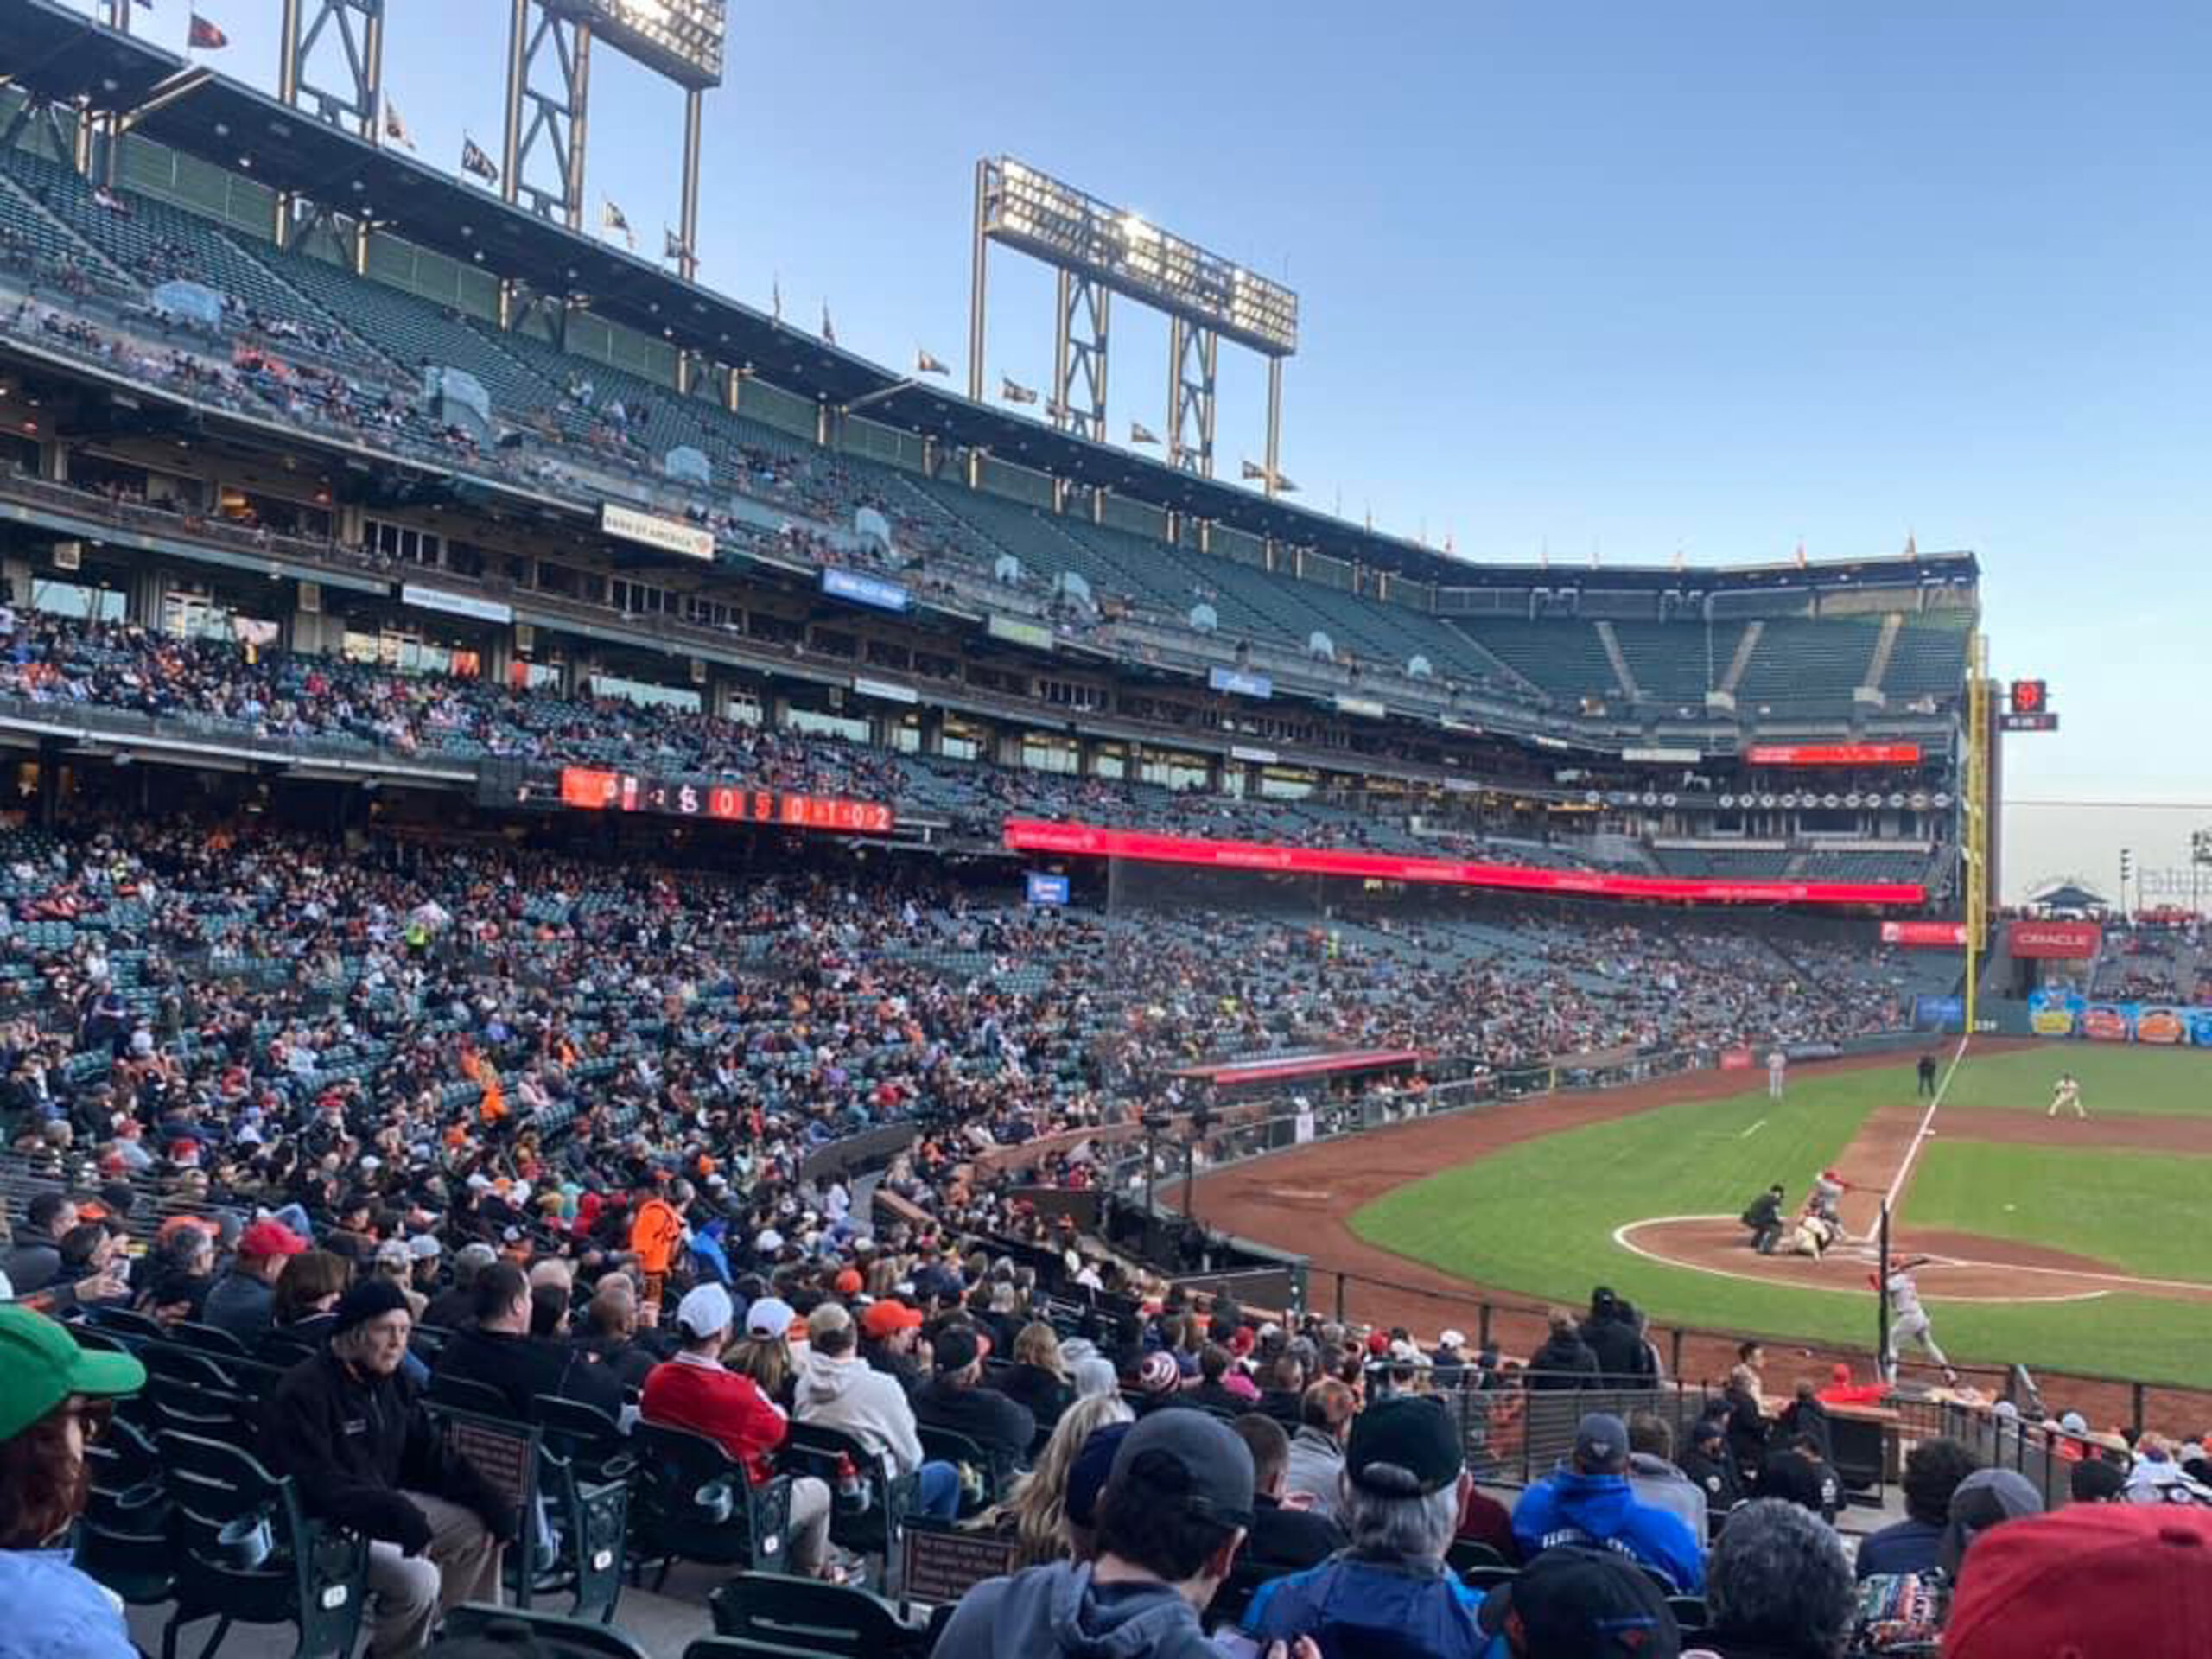 Angry San Francisco Giants Fans Rail Against Beer Costs, Parking Fees, BART as Attendance Drops